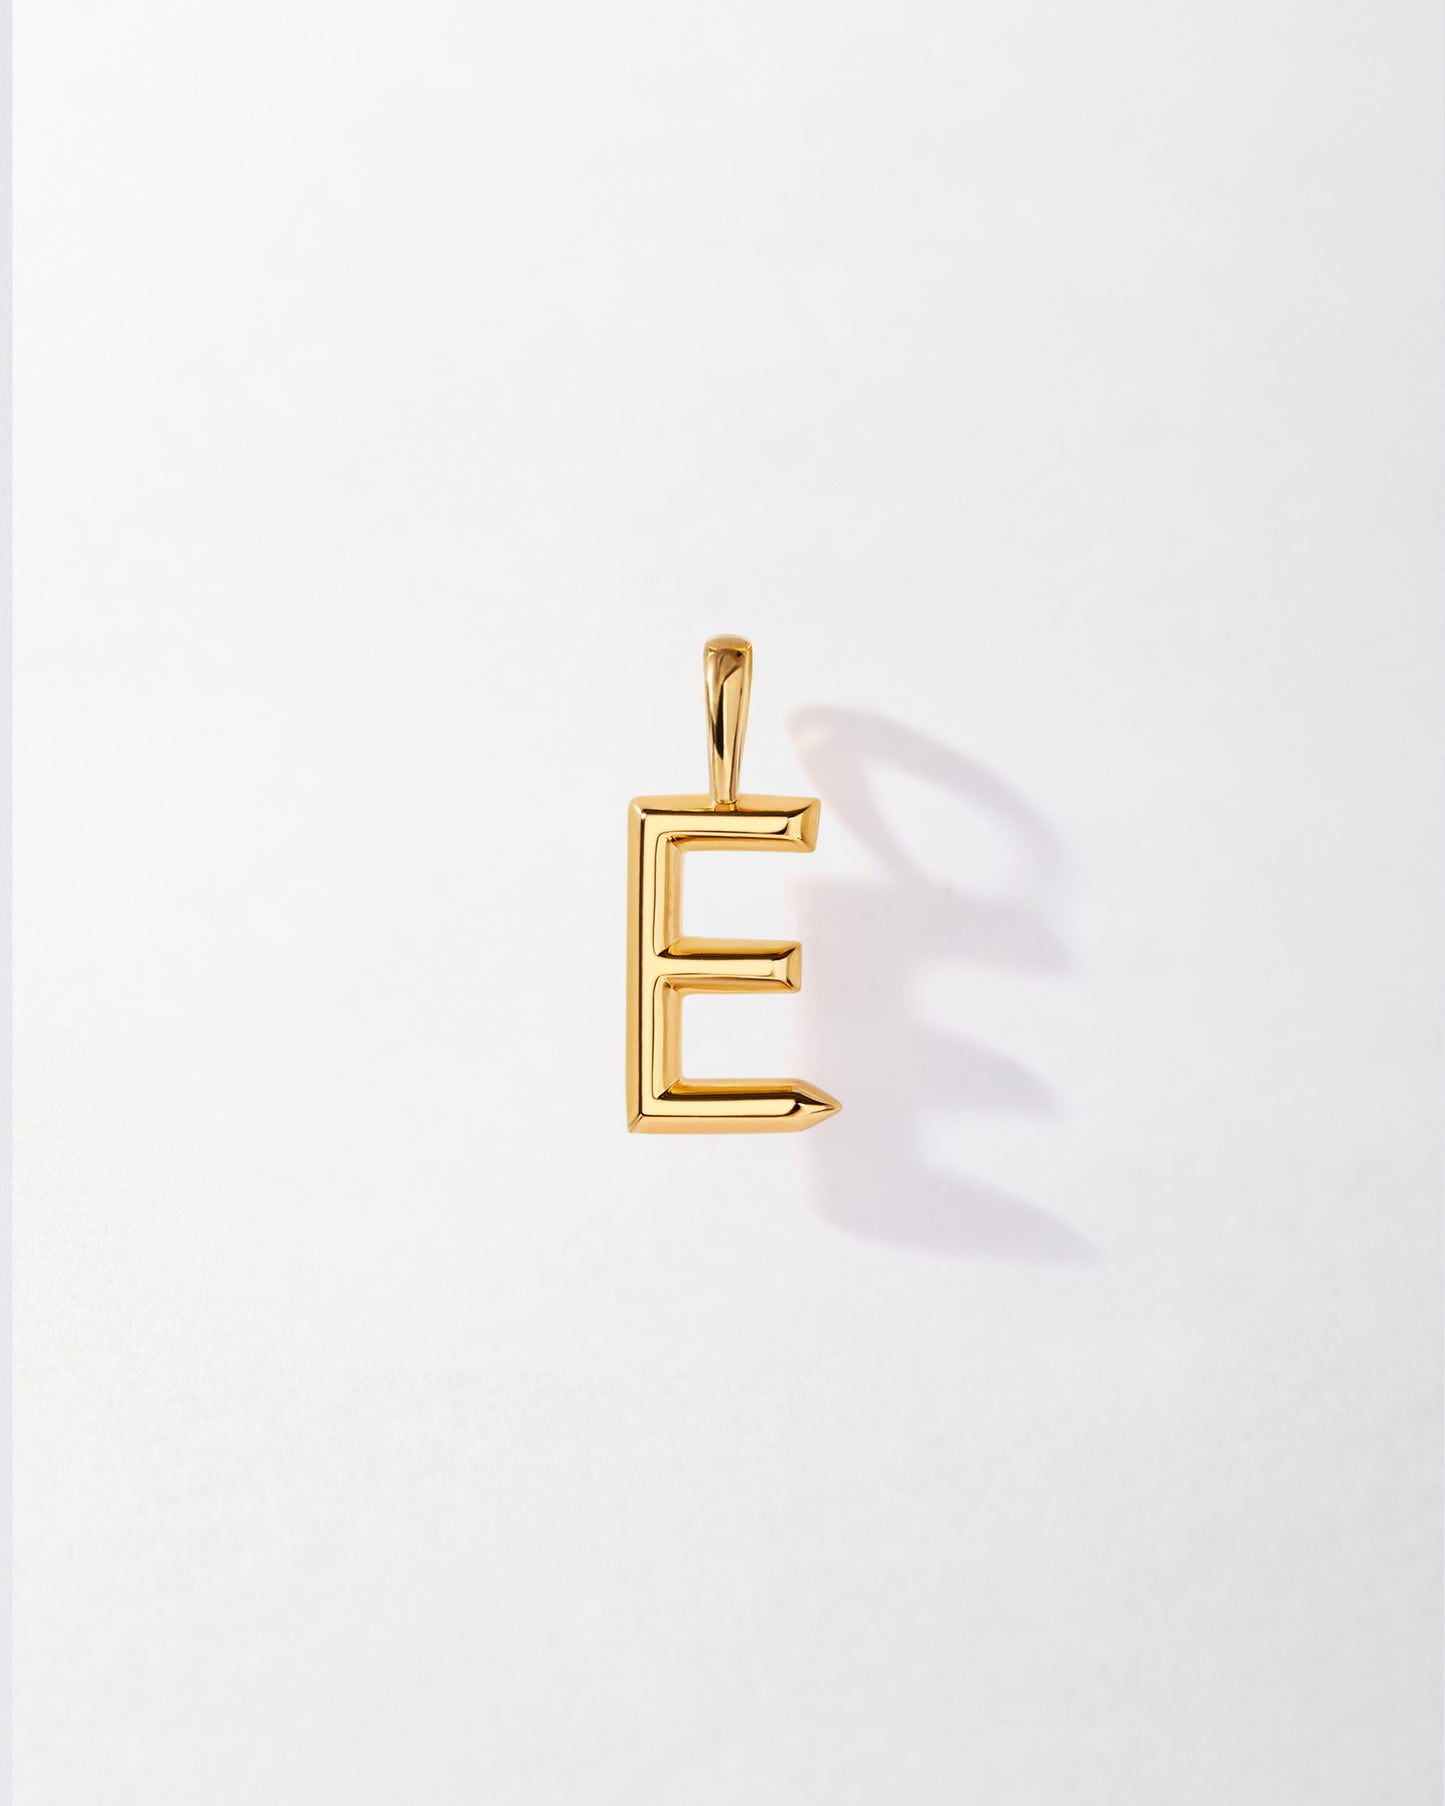 Selected Initial (Gold)